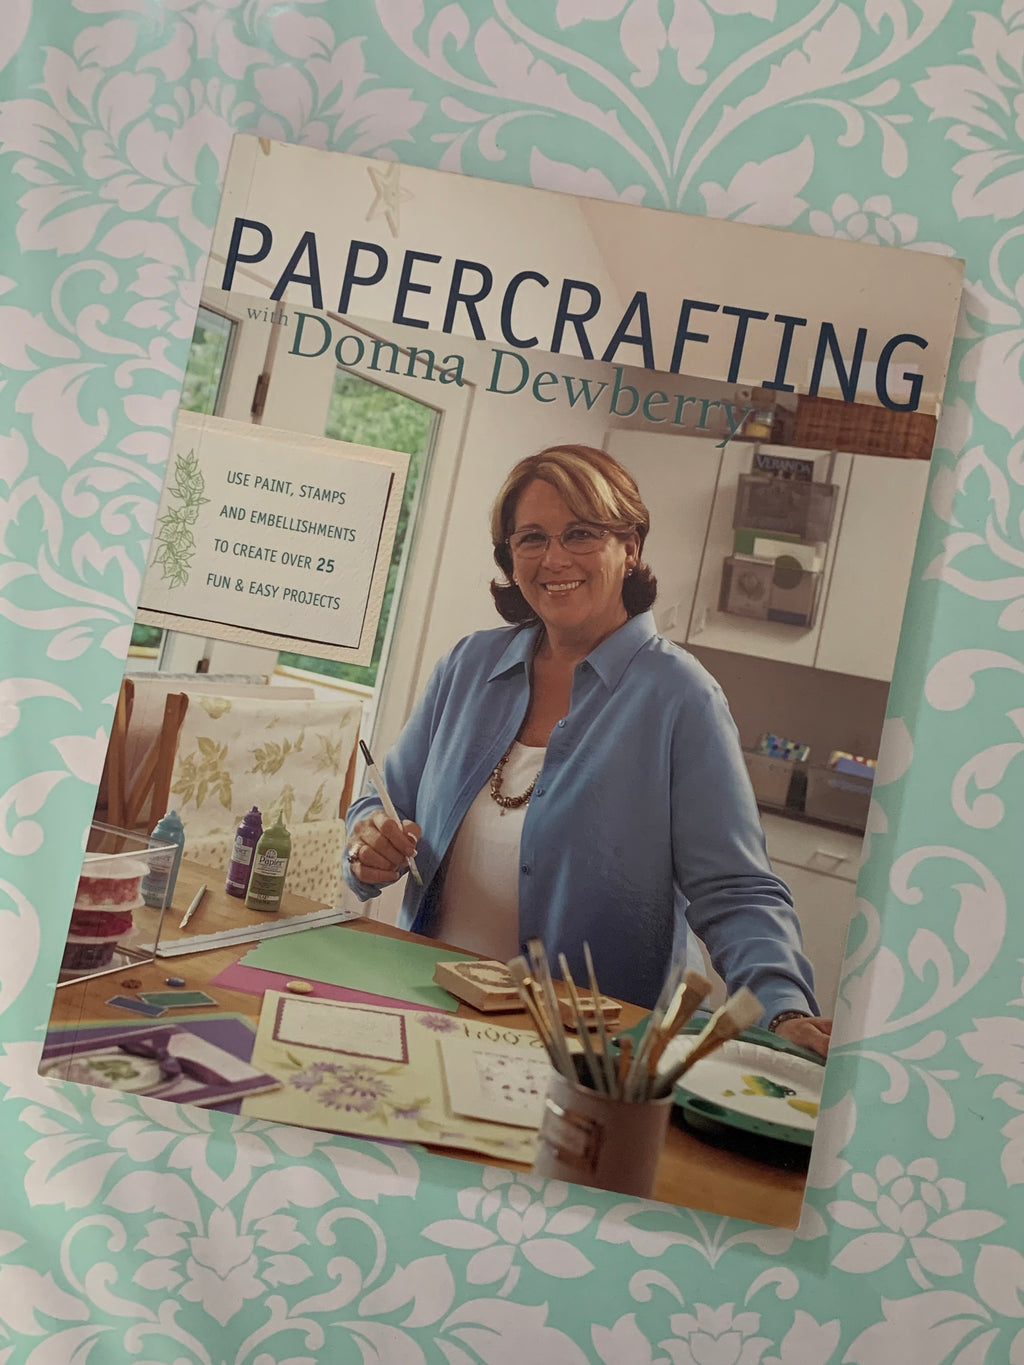 Papercrafting- By Donna Dewberry